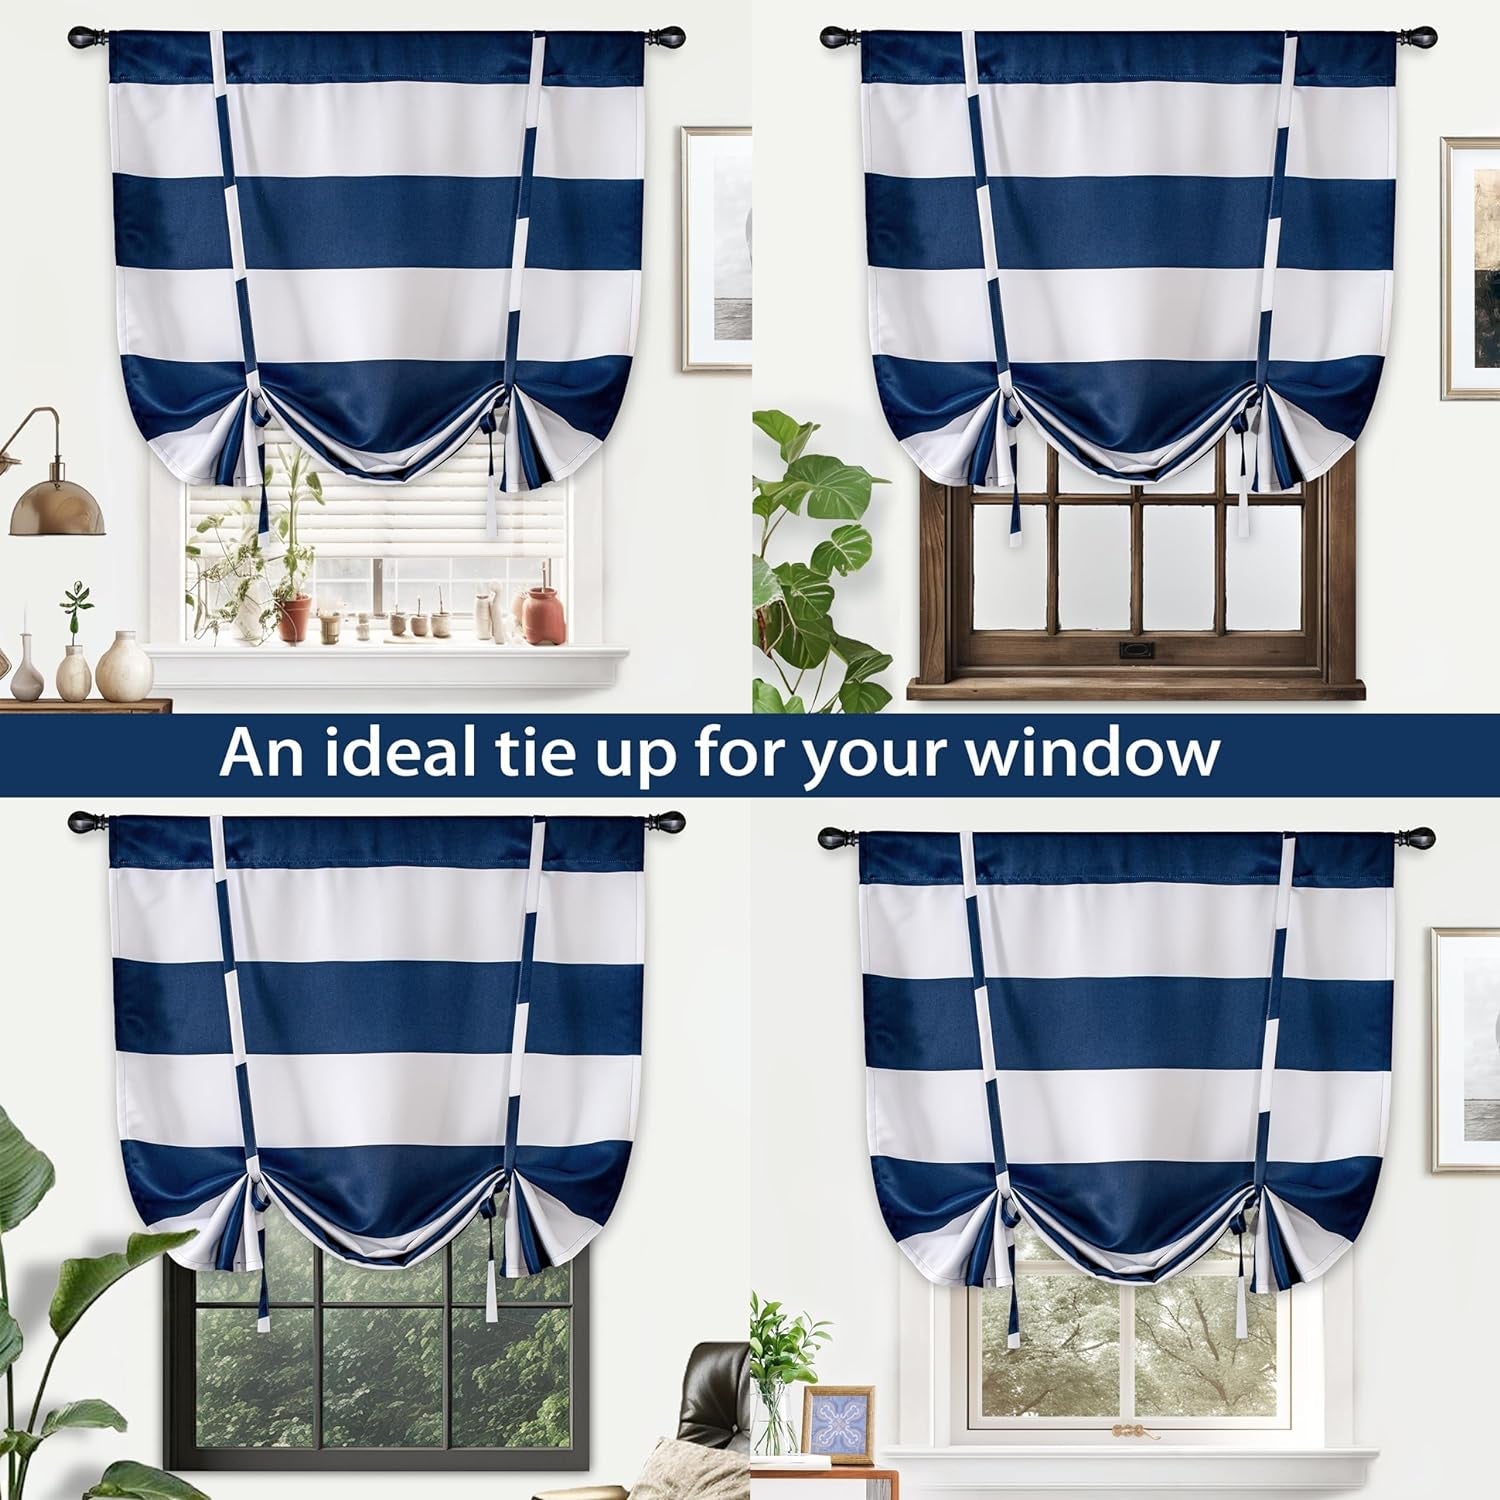 Driftaway Tie up Curtains for Small Windows Mia Stripe Pattern Room Darkening Tie up Shades Curtain Adjustable Balloon Roman Curtain Rod Pocket for Living Room Kitchen 45 Inch by 47 Inch Navy